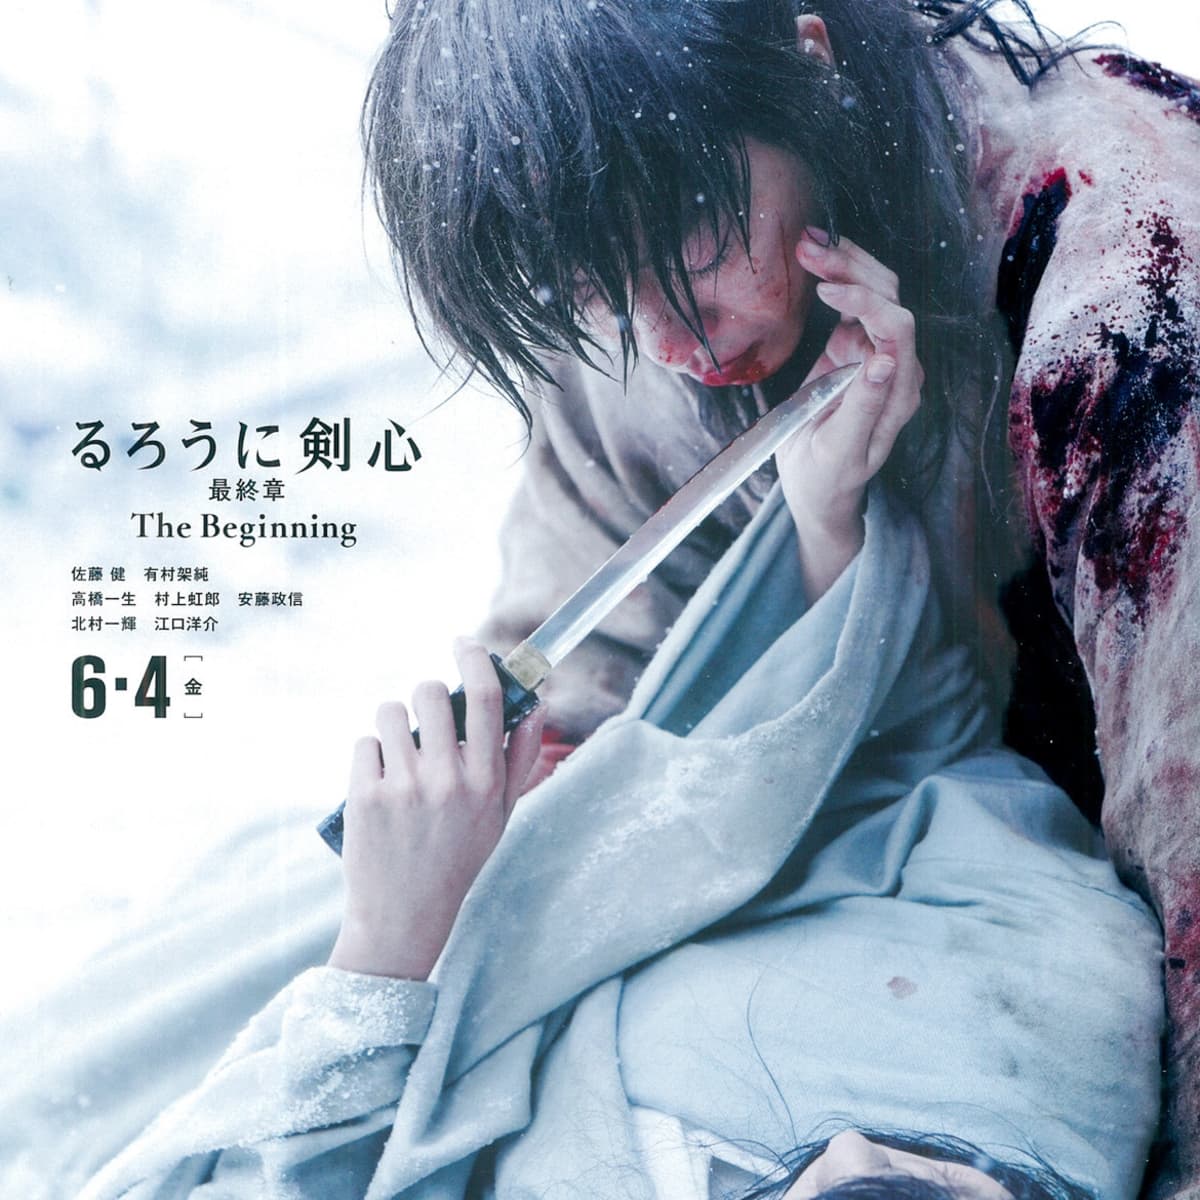 Rurouni Kenshin live-action movie: the things they did right (and